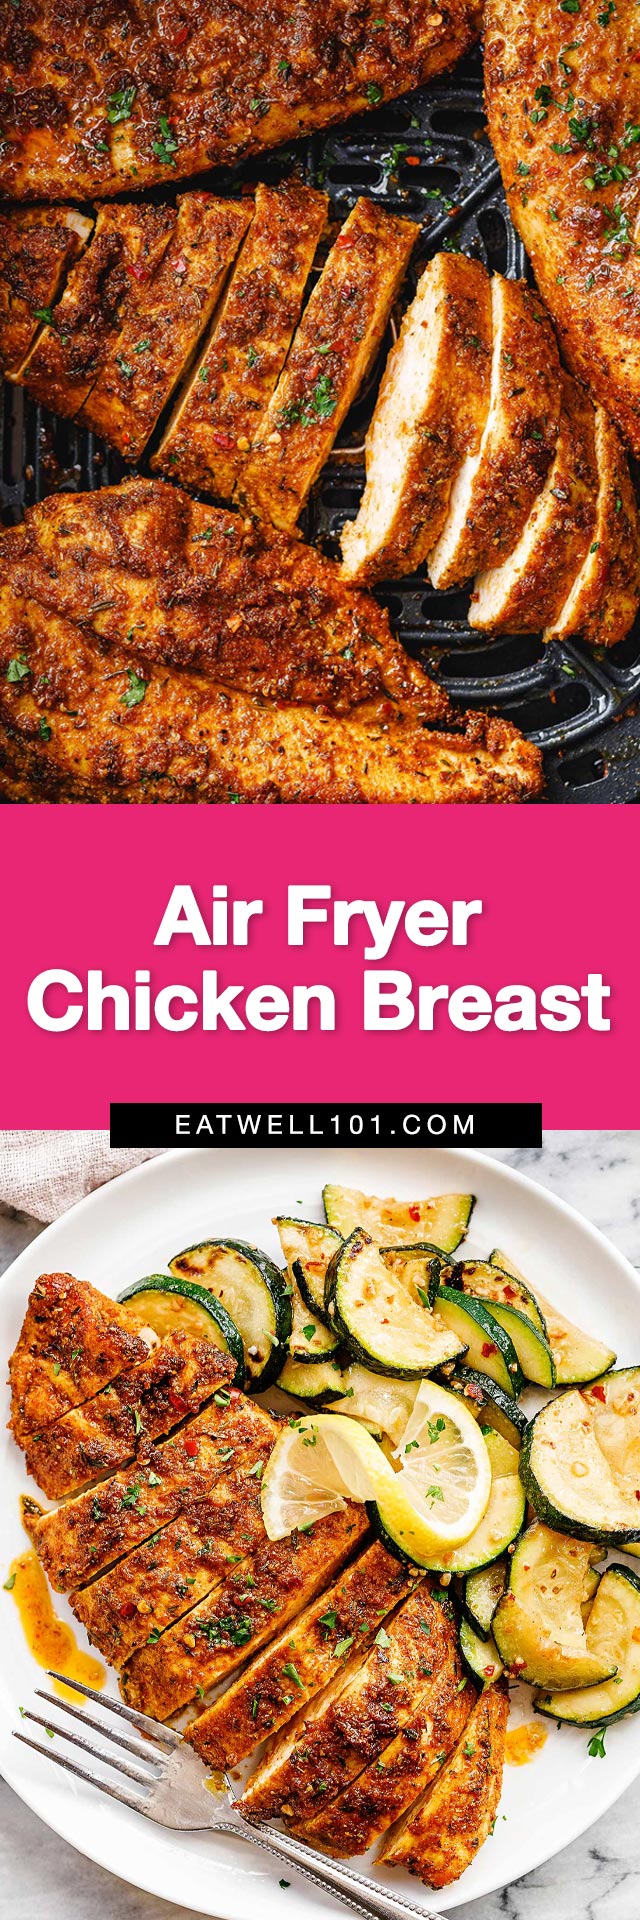 Air Fryer Chicken Breast - #airfryer #chicken #recipe #eatwel101 - Easy to make and takes just a few minutes to cook. Cooking chicken breast in the air fryer makes your lunches, dinners, and meal prep super quick and delicious!